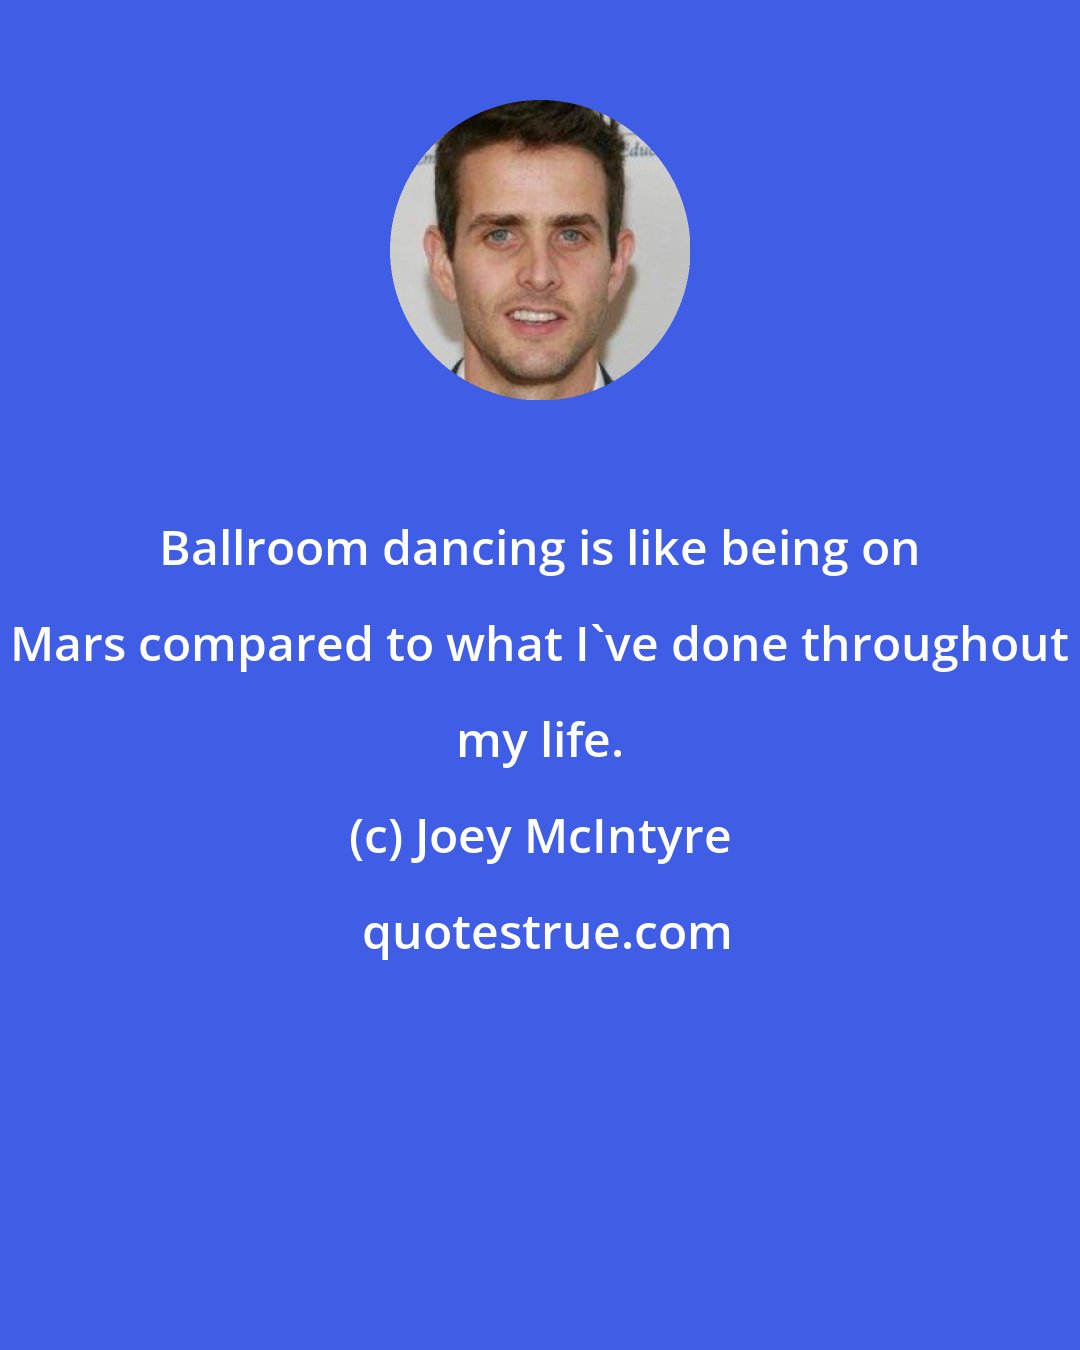 Joey McIntyre: Ballroom dancing is like being on Mars compared to what I've done throughout my life.